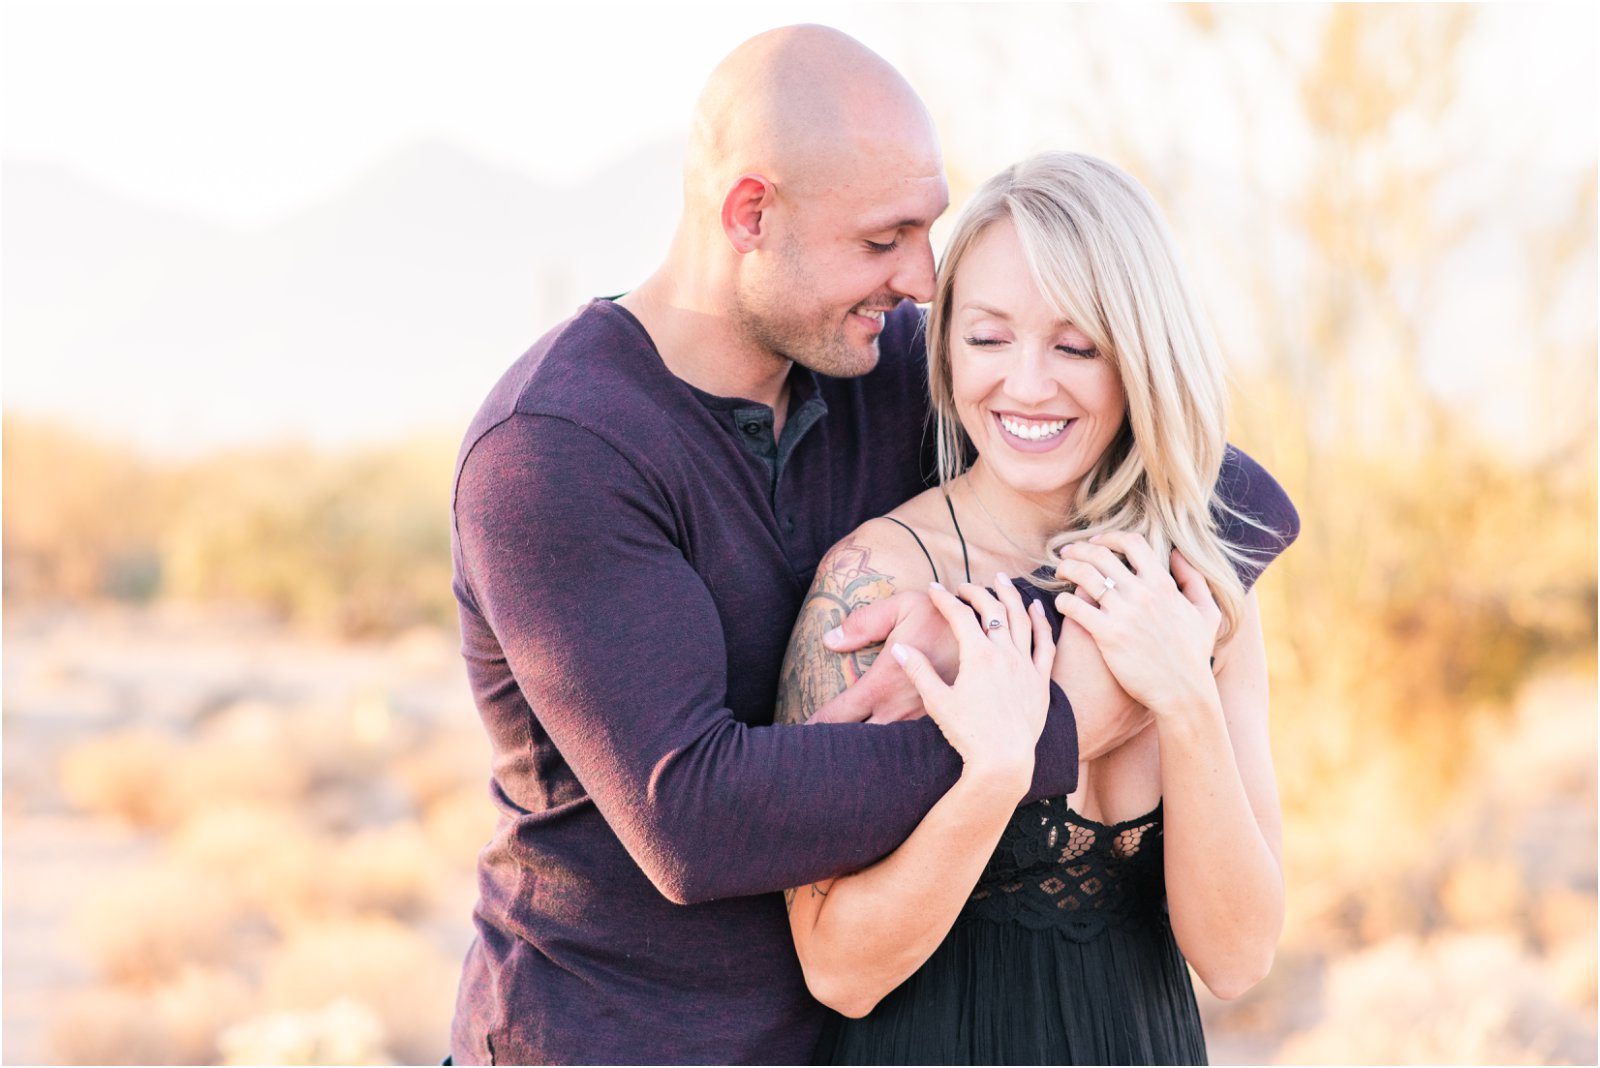 moody engagement session in the desert in Tucson, AZ by Tucson wedding photographer Christy Hunter Photography